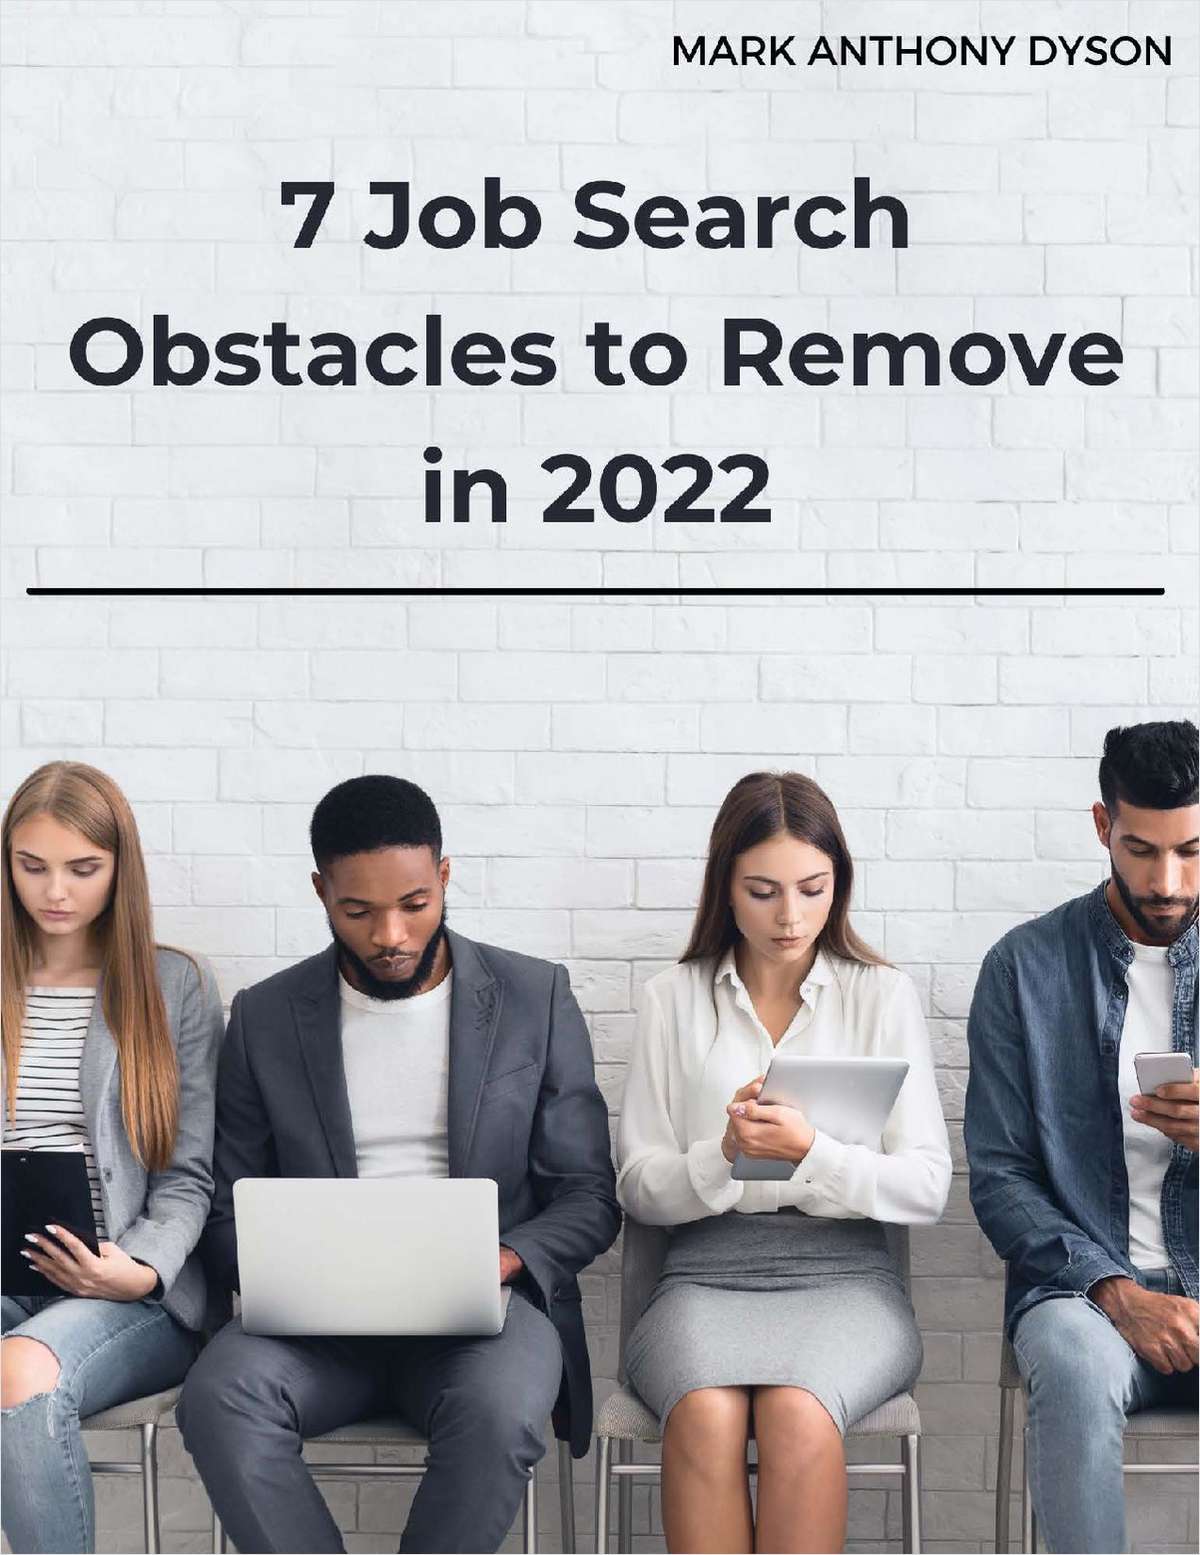 7 Job Search Obstacles to Remove in 2022